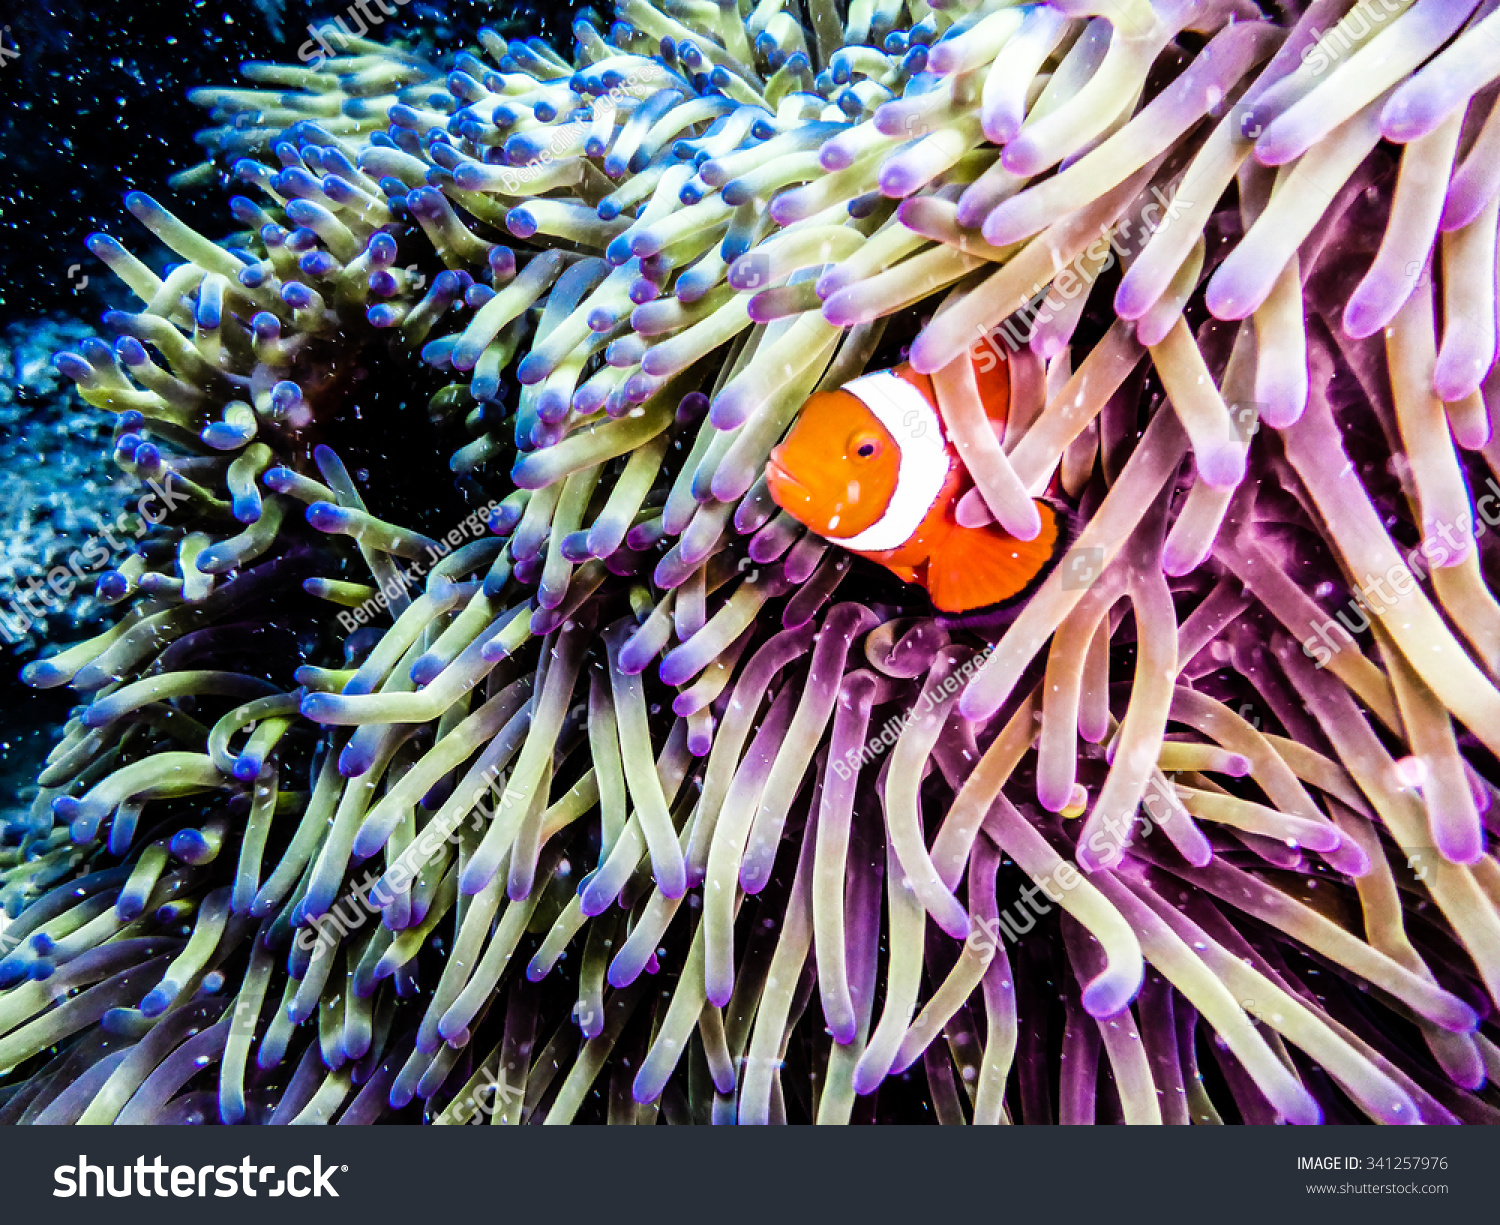 Clownfish peaking out of an anemone. Taken while diving at the Great Barrier Reef, Queensland, Australia. #341257976